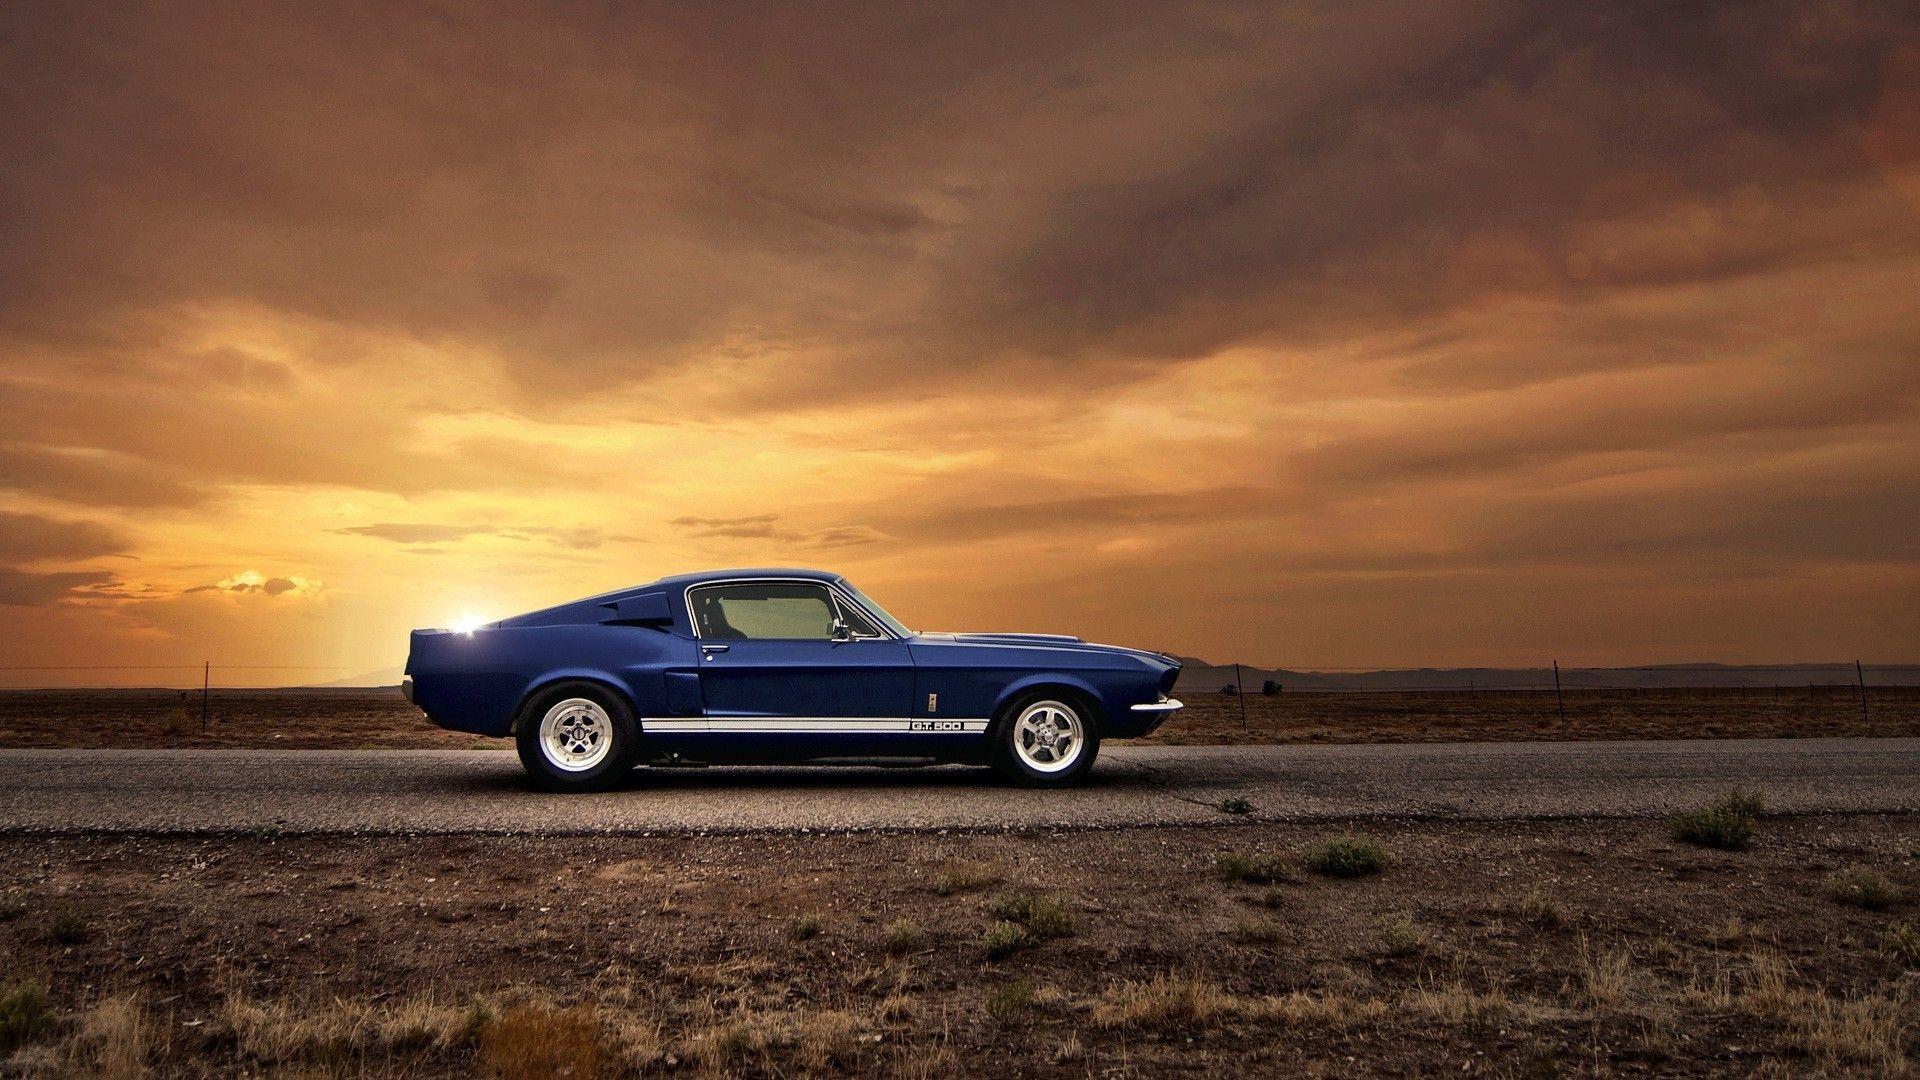 American Muscle Car Wallpaper iPhone HD Desktop Background With